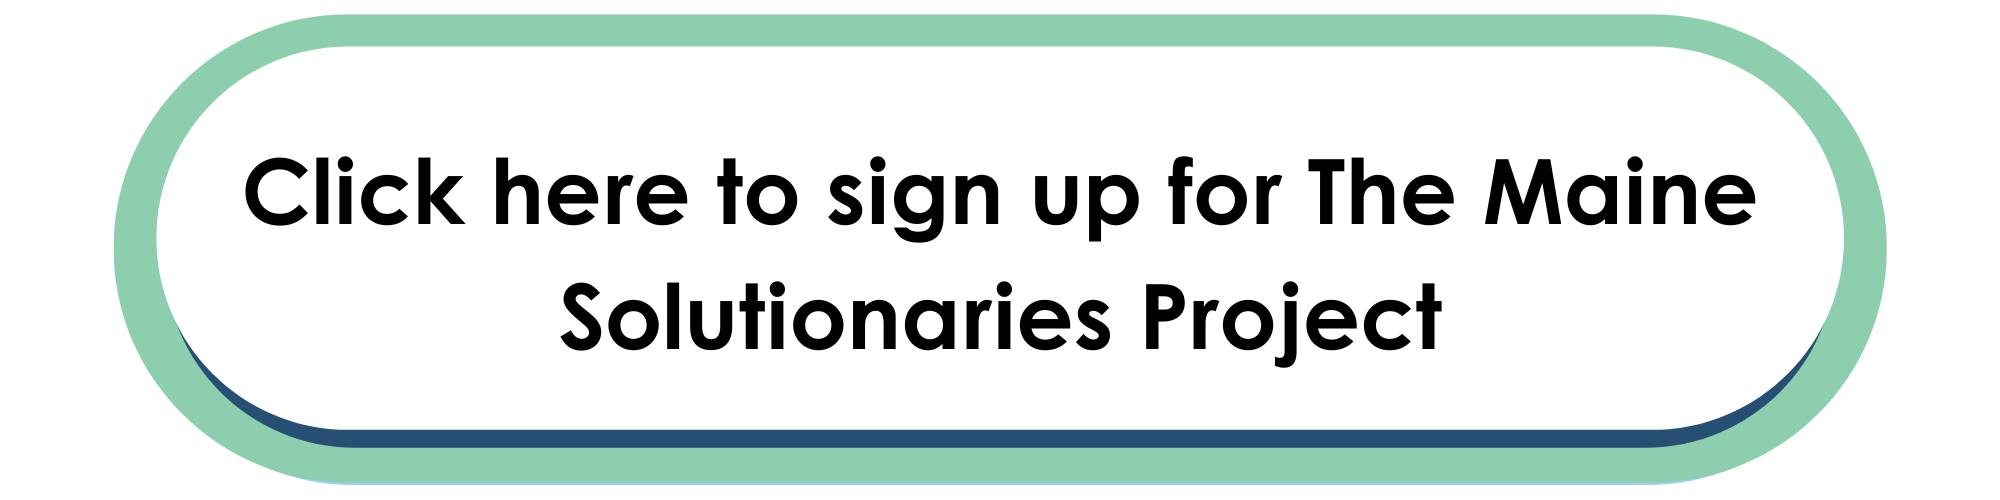 Click this button to register for the Maine Solutionaries Project